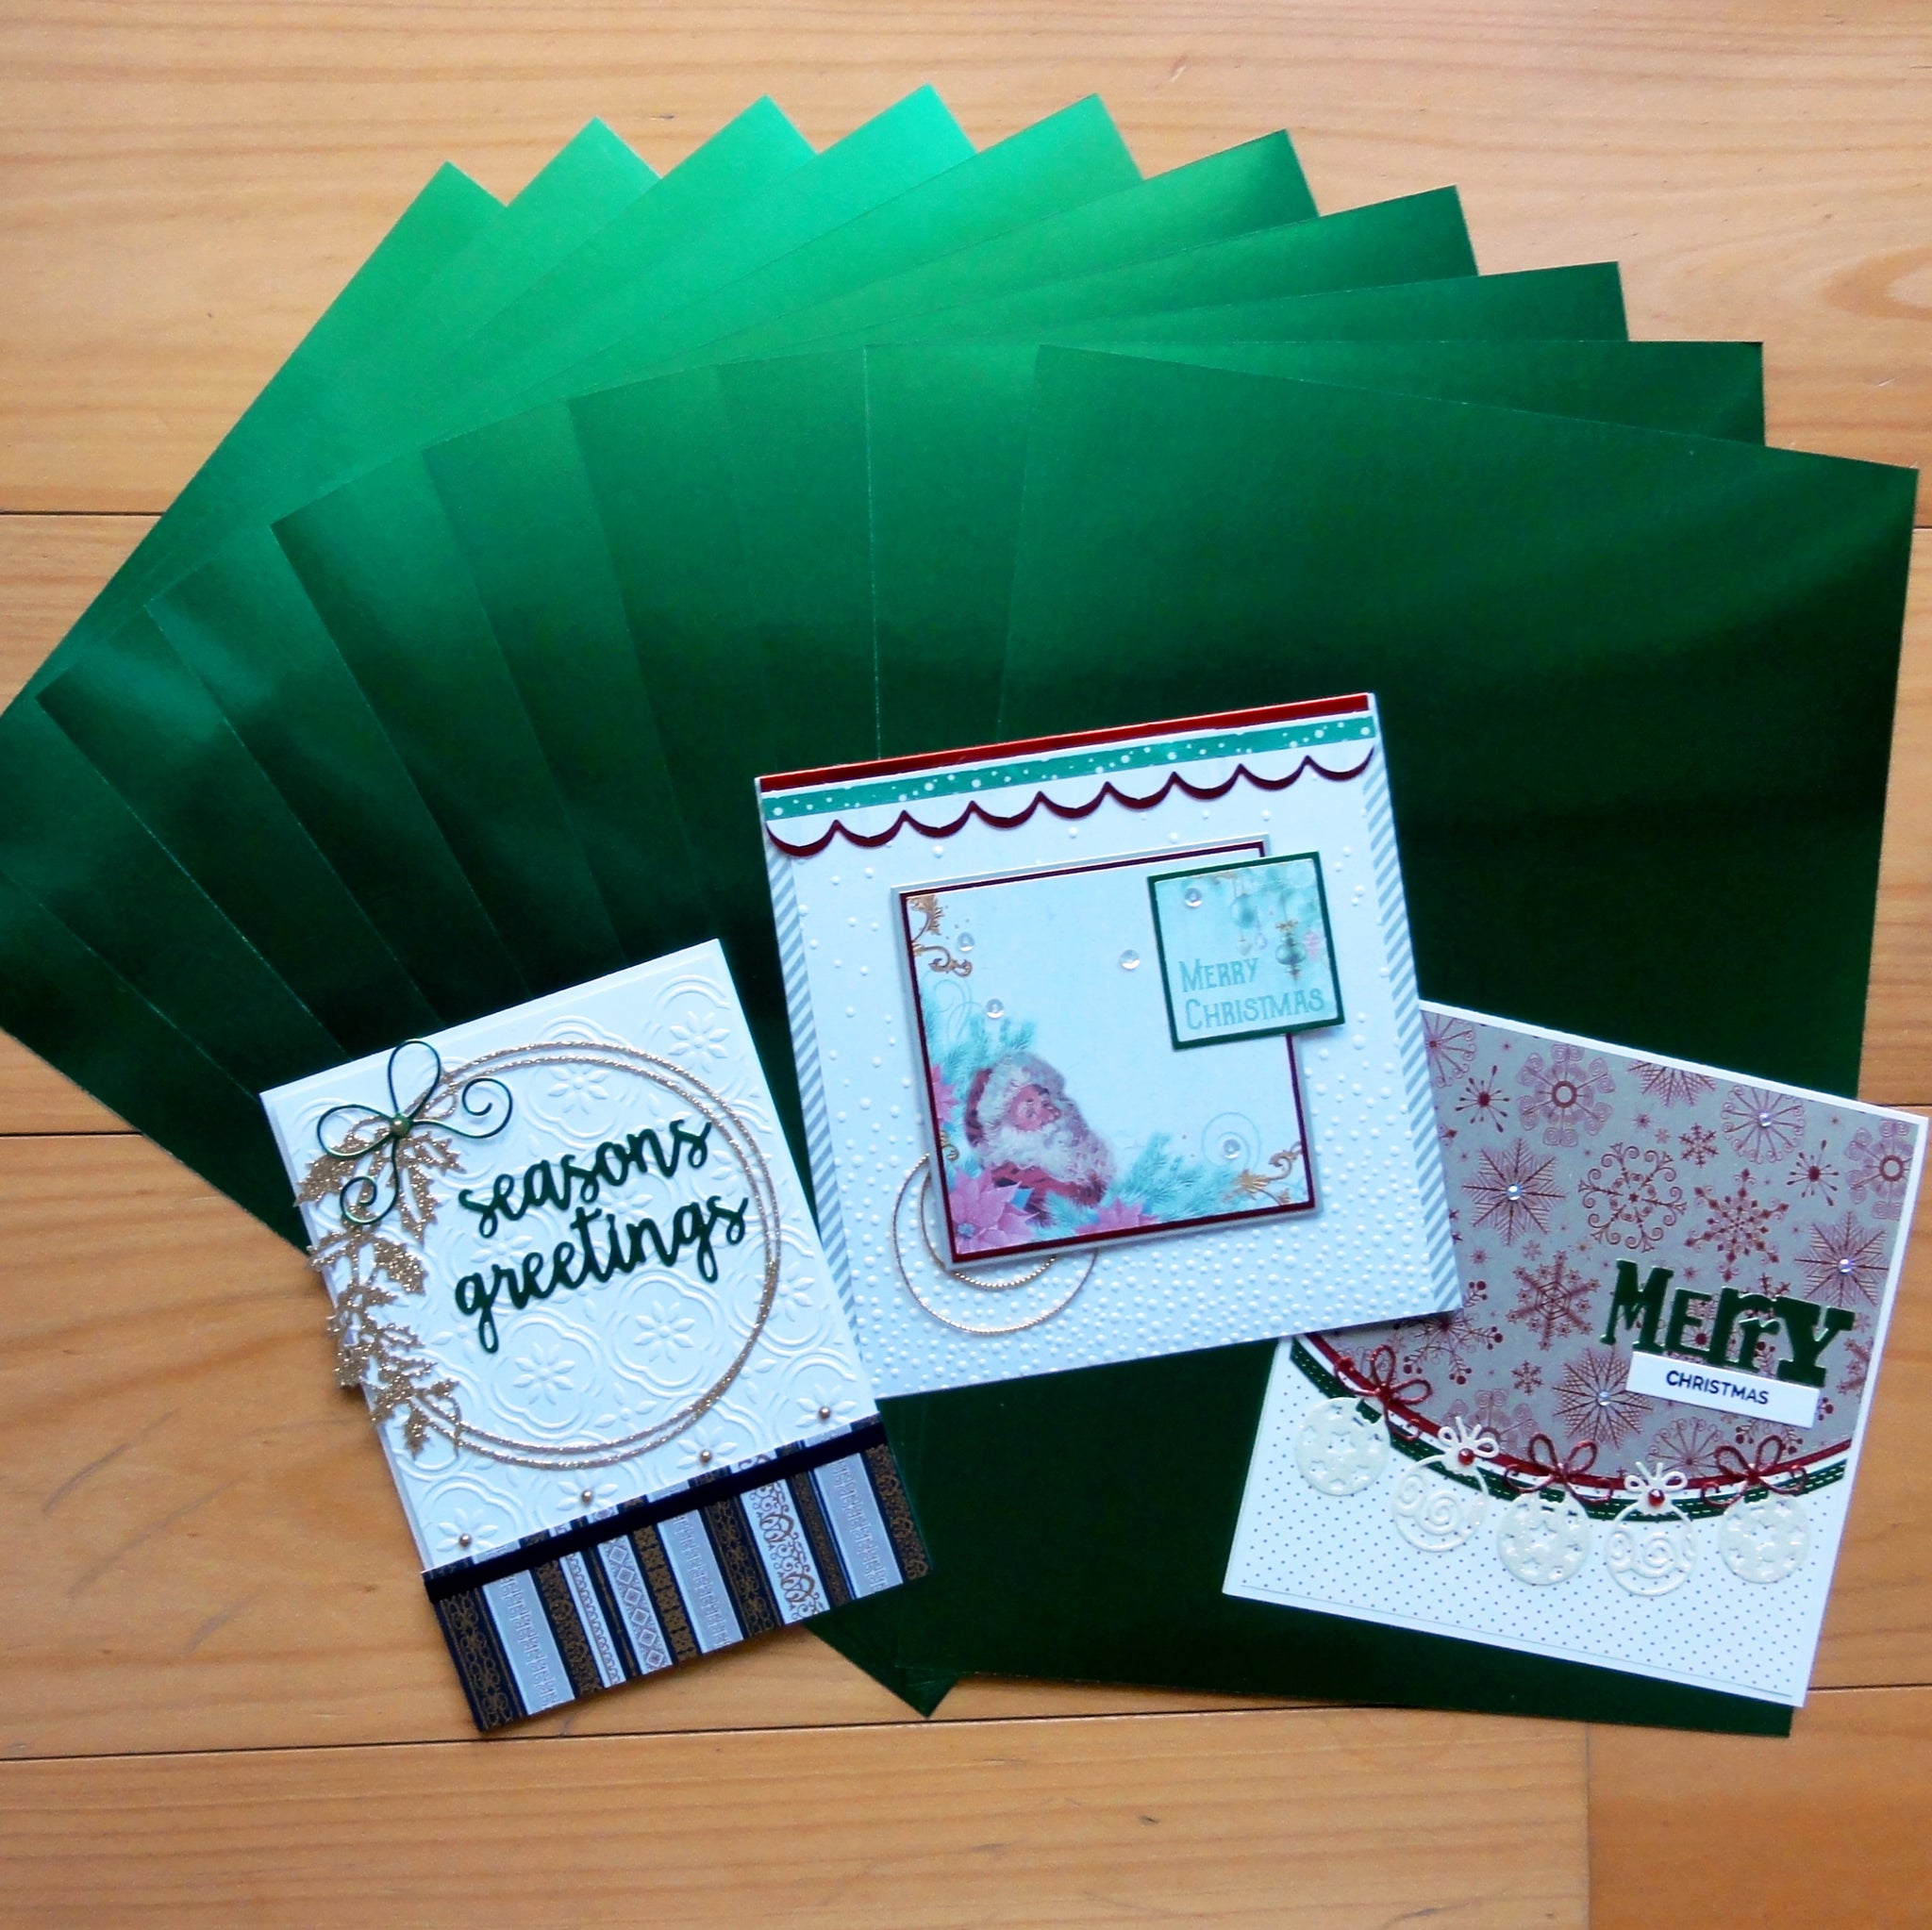 FOIL MIRROR CARD A5 GREEN 275 GSM 10 SHEETS CHRISTMAS BIRTHDAY CELEBRATION CARDMAKING